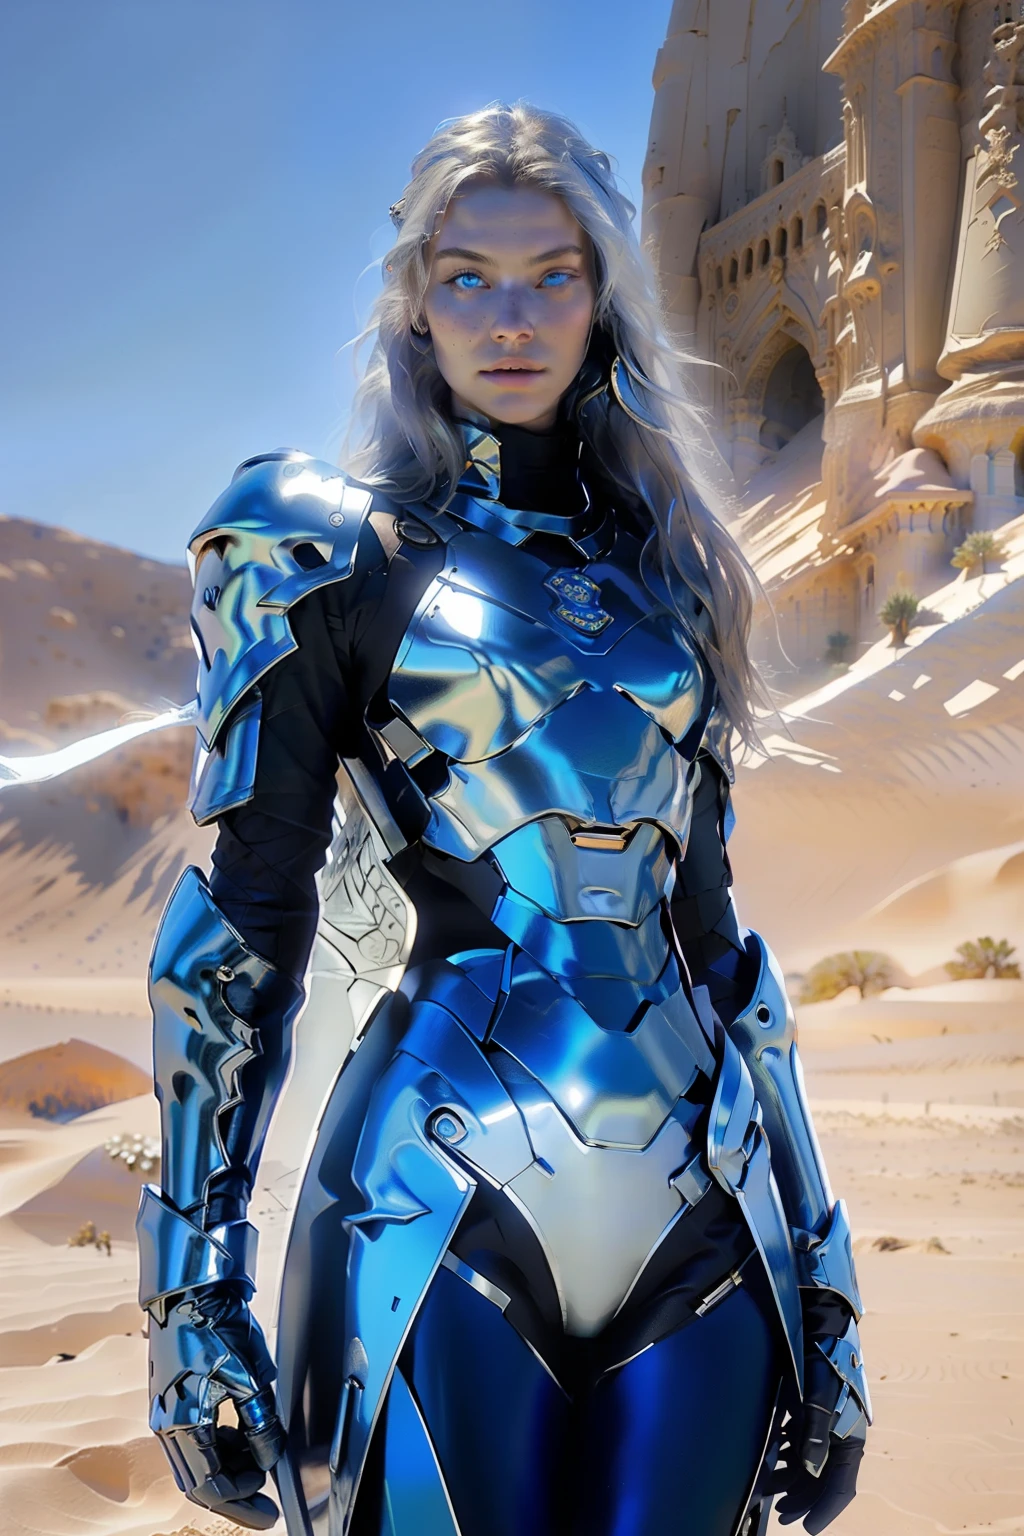 Masterpiece, Ultra Wide Shot, (1girl), (intricate clothes armor), freckles, (beautiful face:1.2), (blue eyes:1.2), (white long hair), (1glowing blue sword stabbed in the ground), (desert background), (desert castle), stones, foggy weather, a beautiful female knight, dark, epic, fantasy art style, uhd, extremely detailed artgerm, 4k fantasy art, beautiful celestial warrior